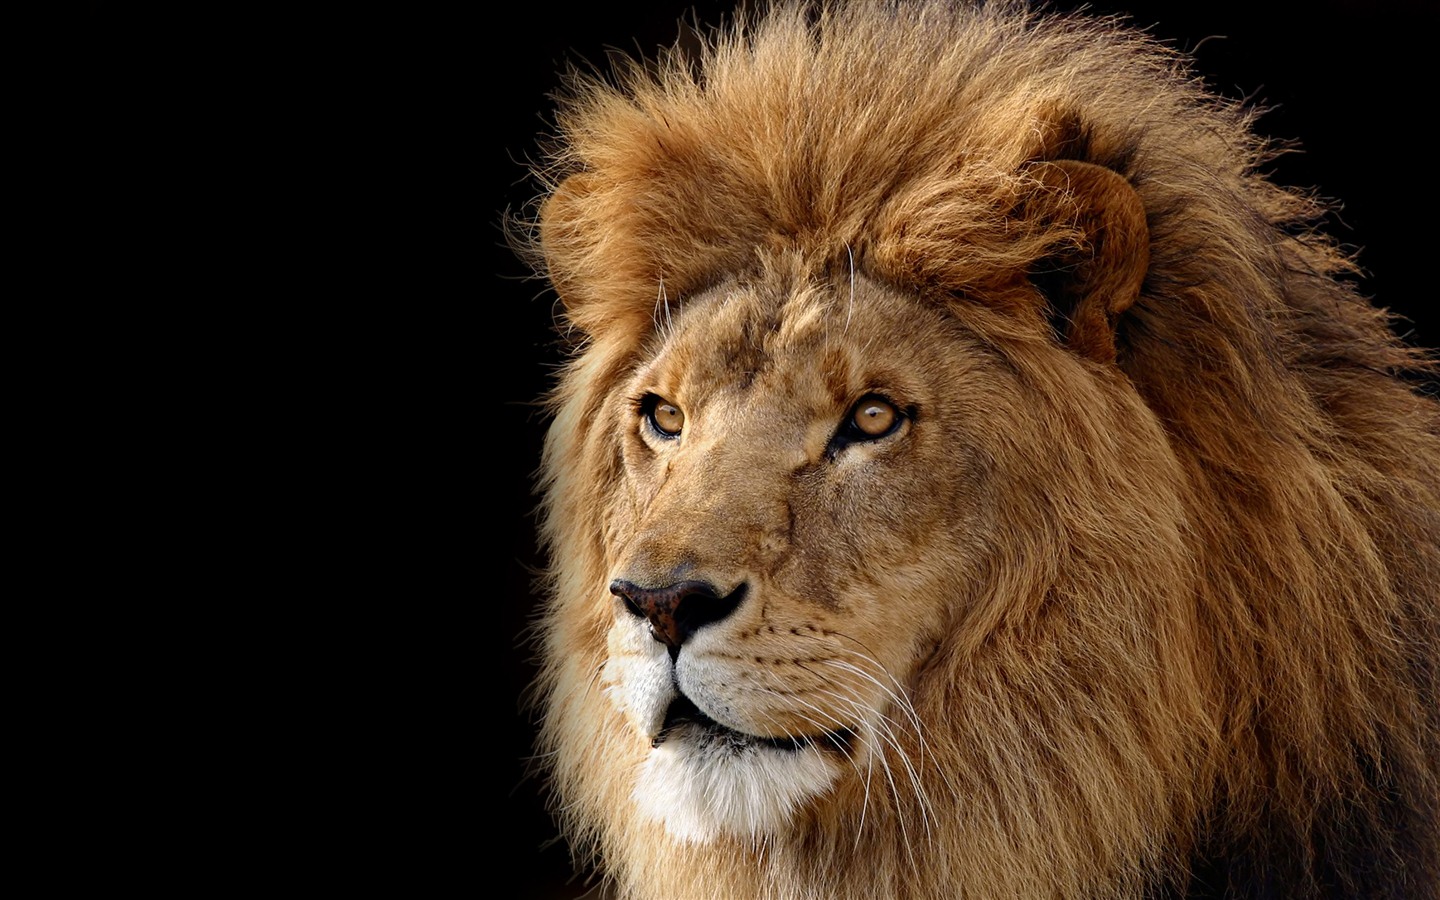 Mac OS X the Lion Apple systems official HD wallpapers #14 - 1440x900